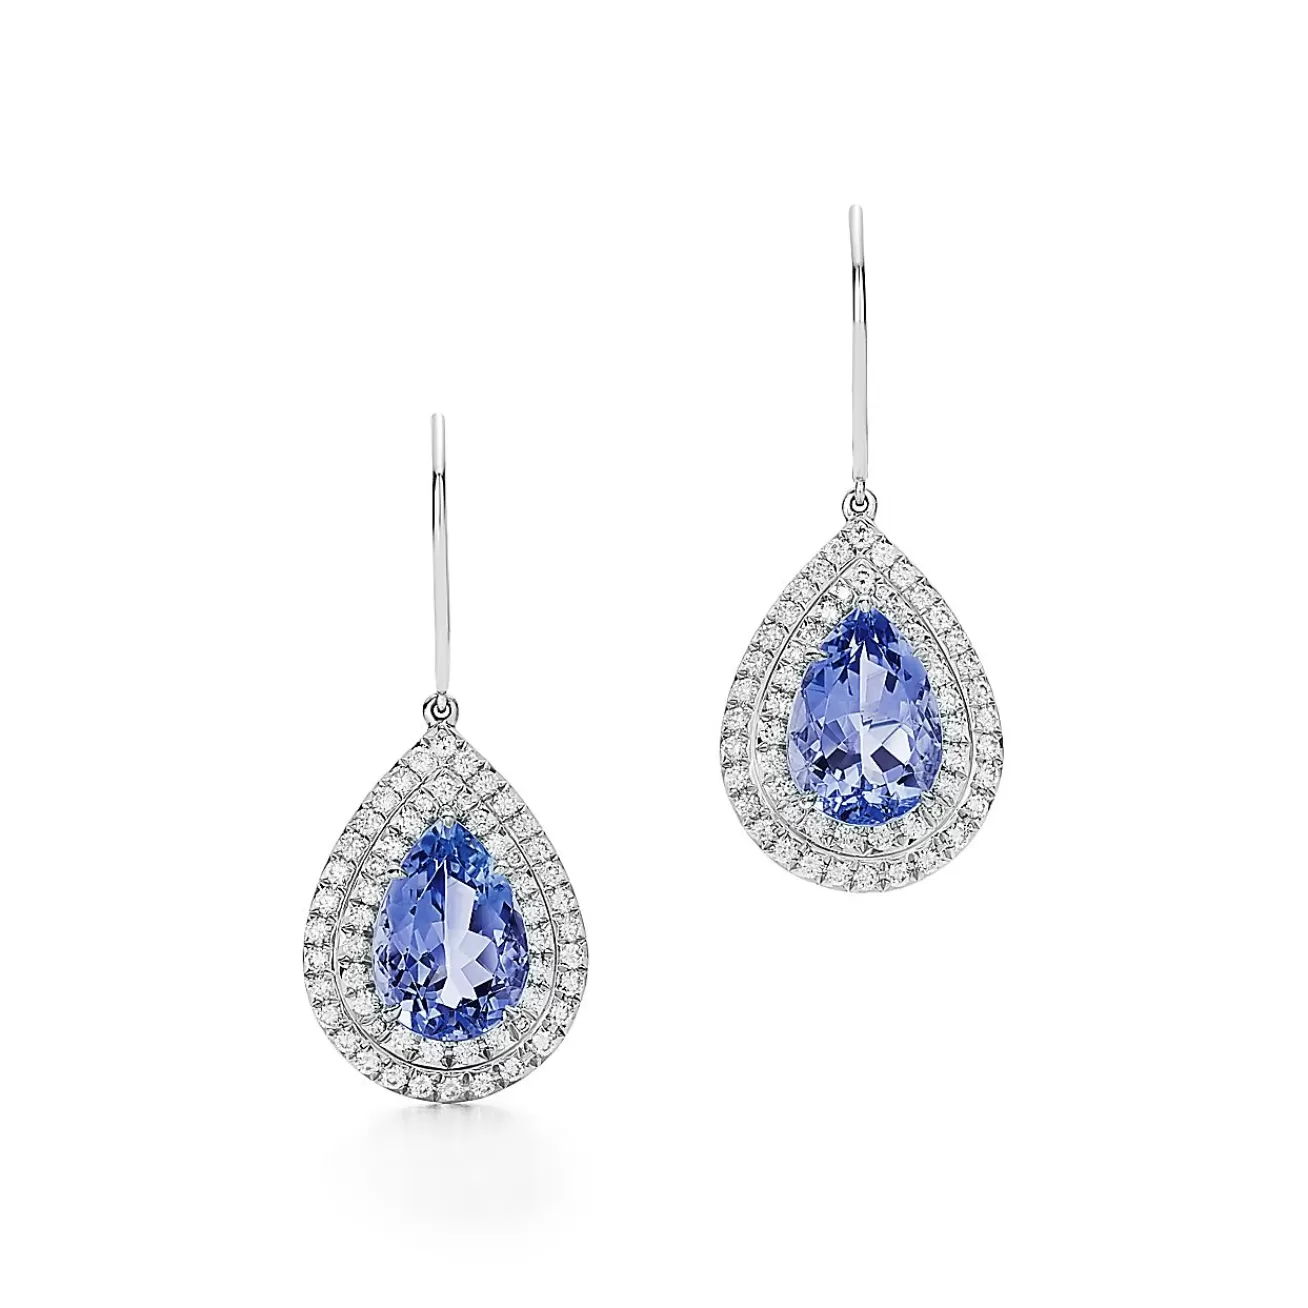 Tiffany & Co. Tiffany Soleste earrings in platinum with tanzanites and diamonds. | ^ Earrings | Platinum Jewelry